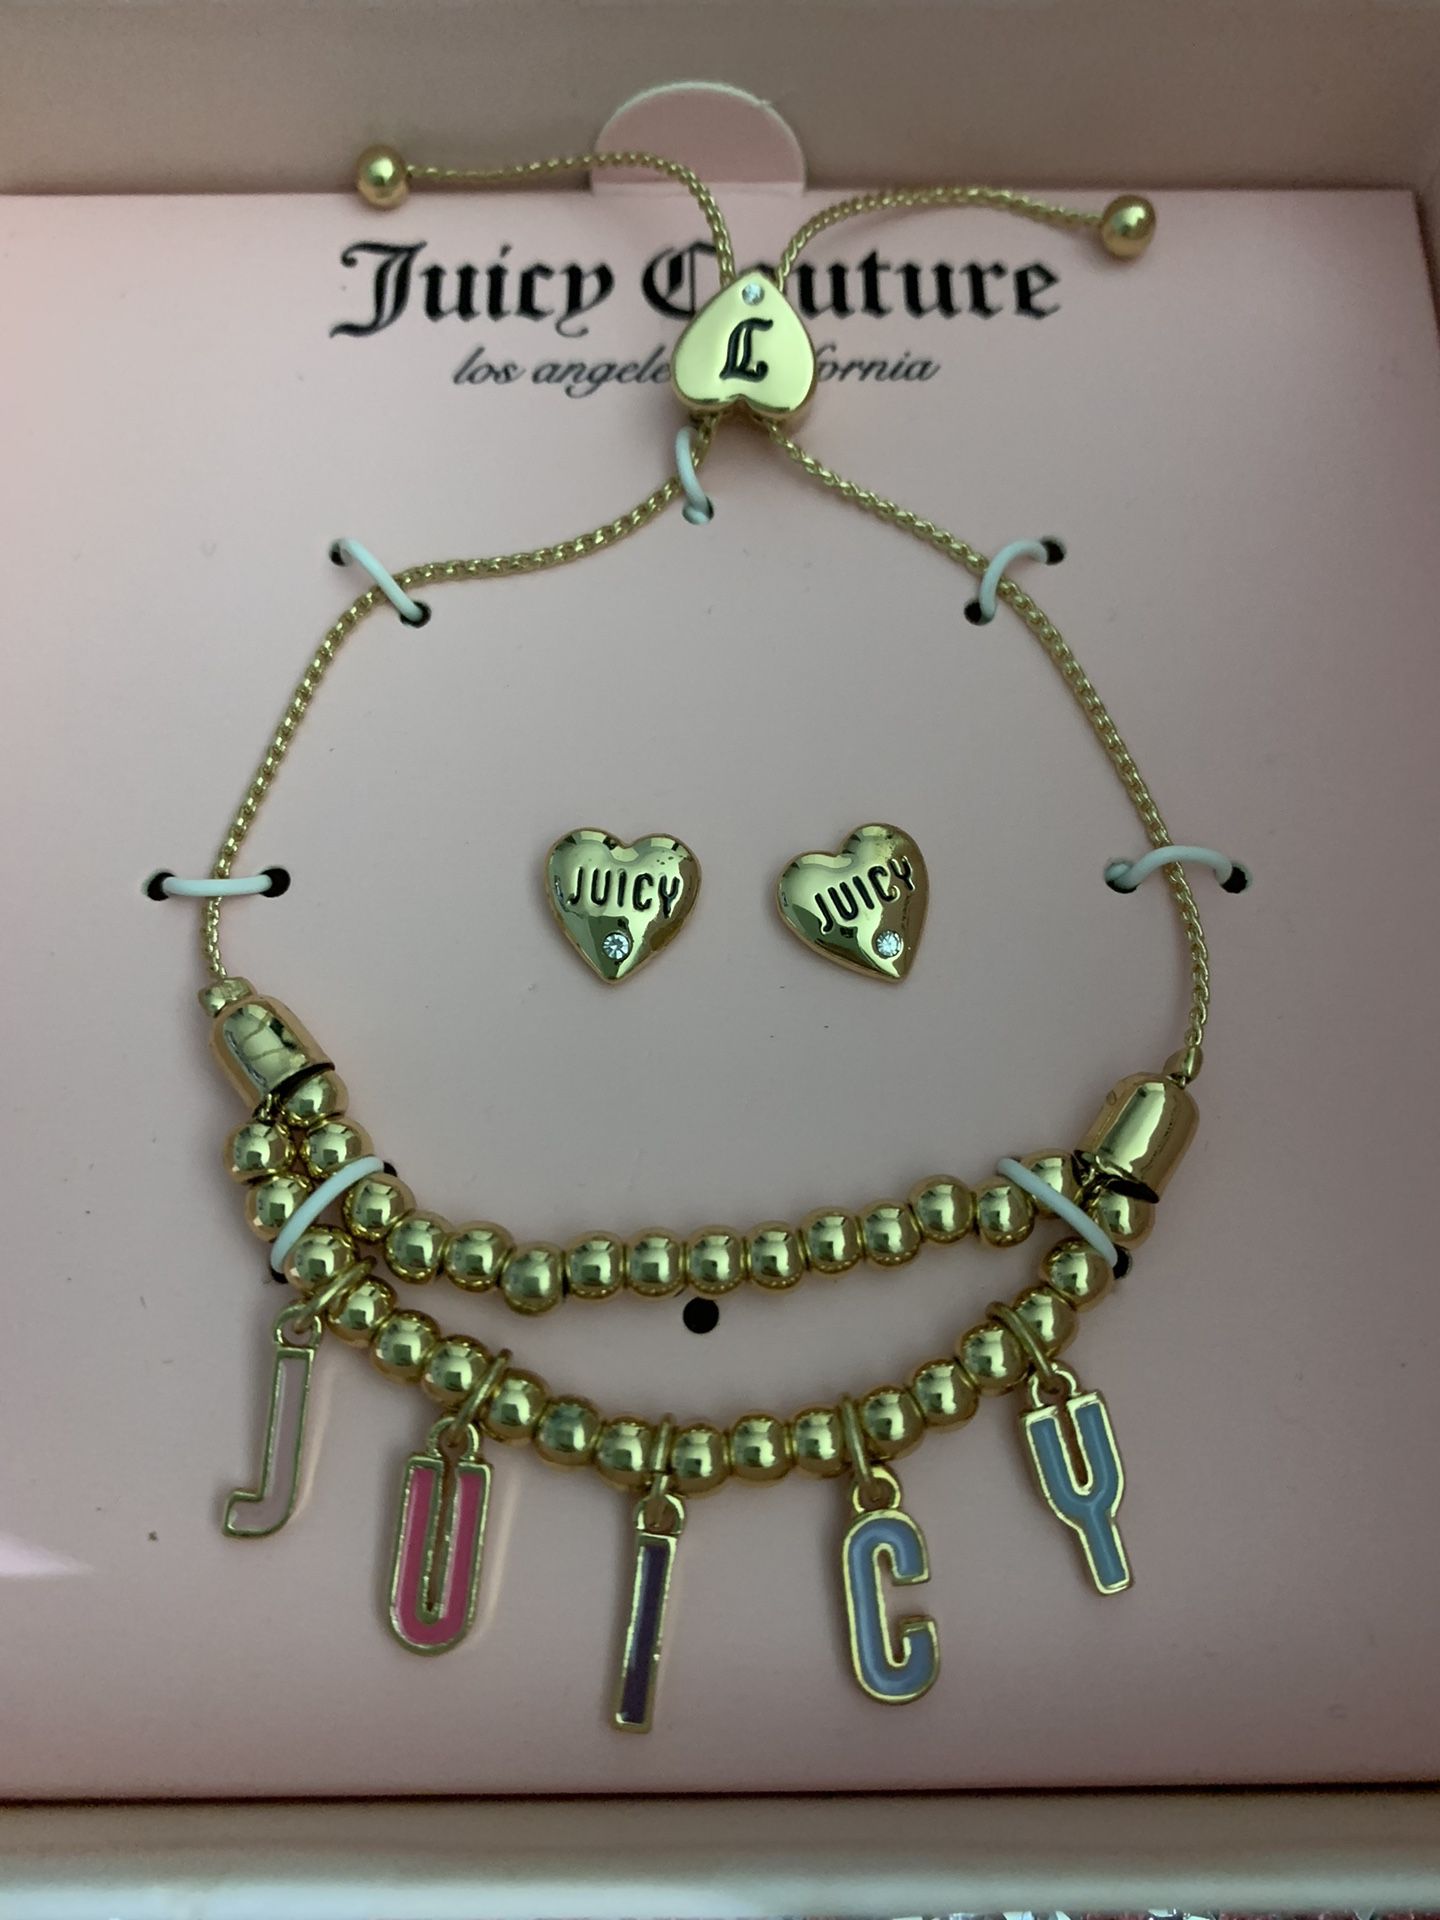 Juicy Couture Charm Bracelet And Earrings Set